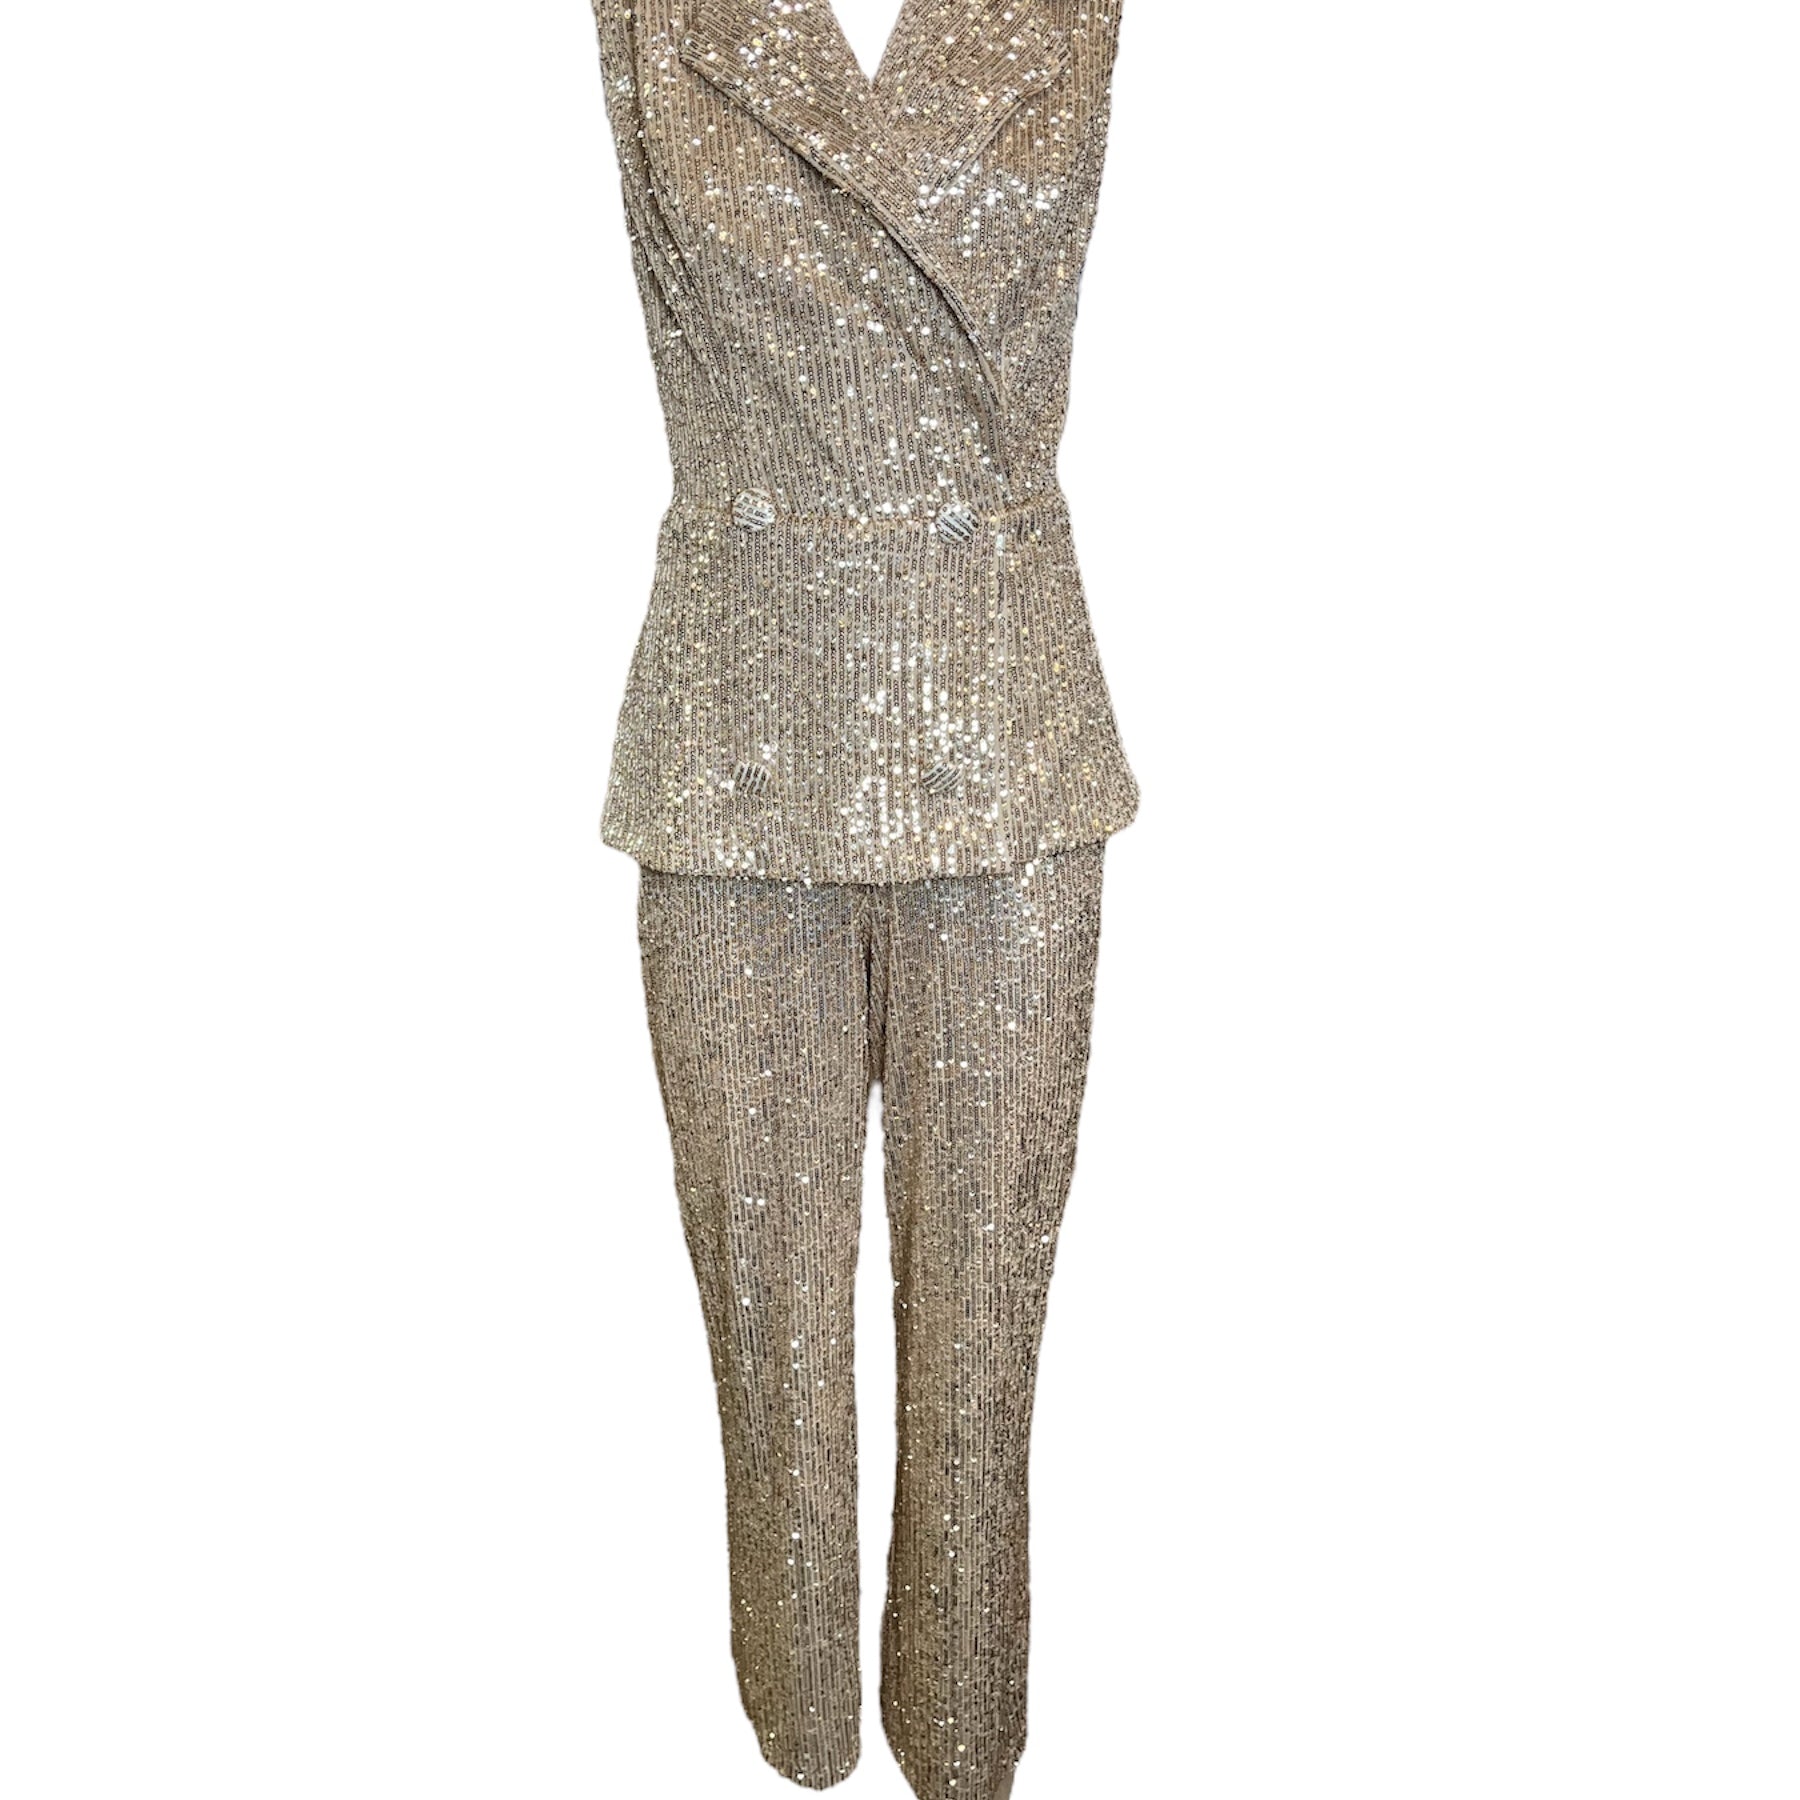 Romeo Gigli Gold Sequin Jumpsuit FRONT PHOTO 1 OF 5